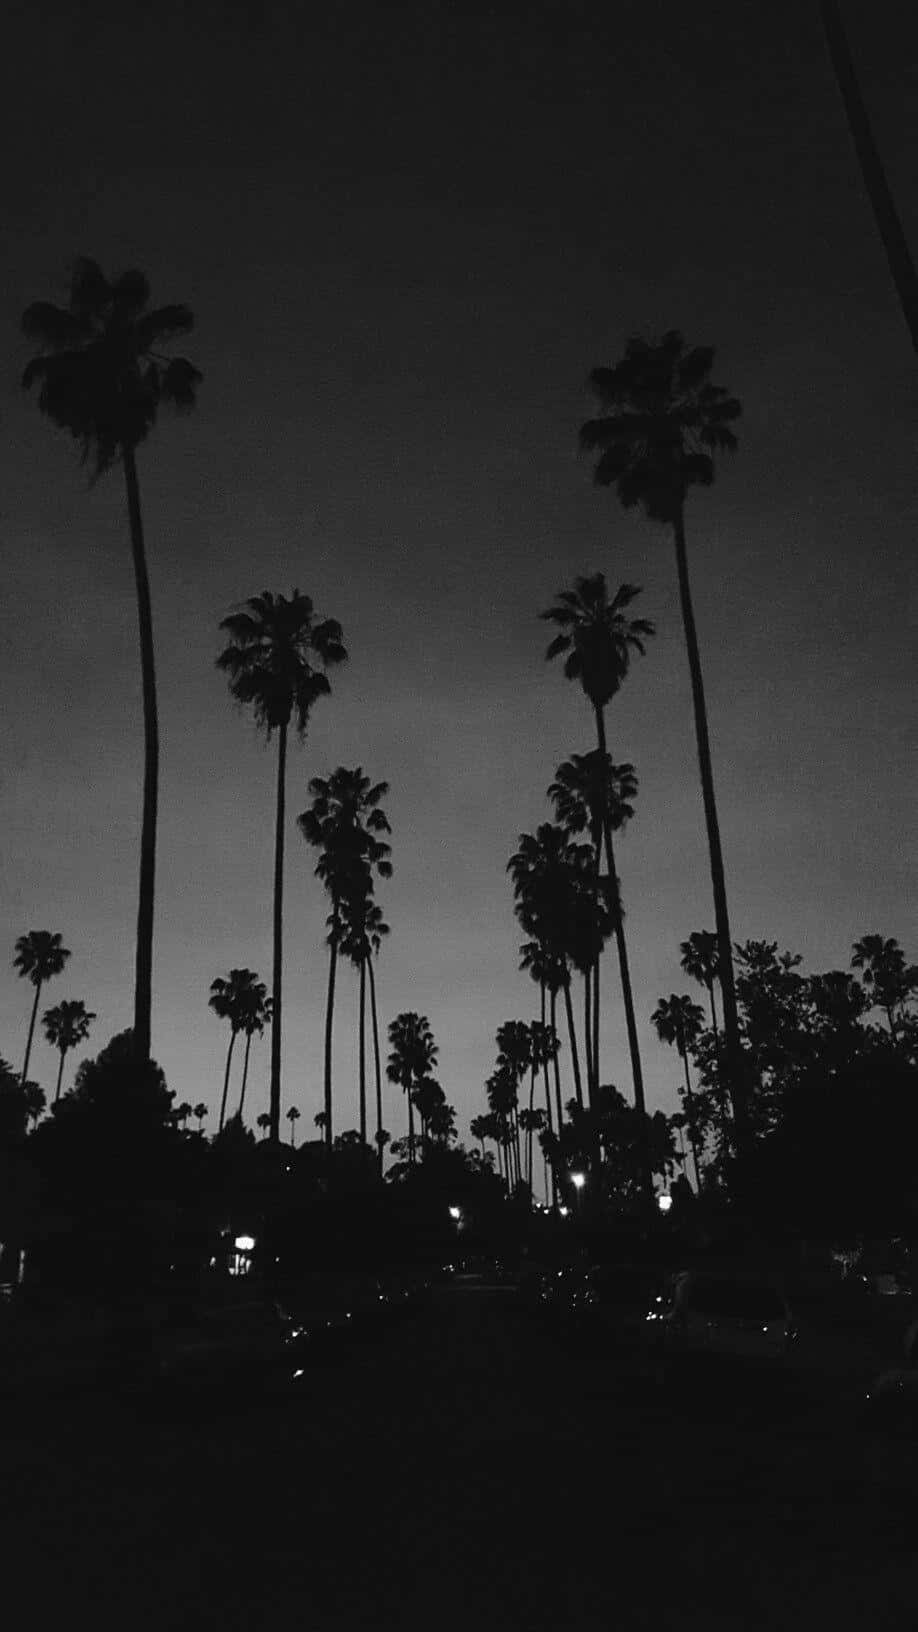 An Aesthetic Black and White Phone Wallpaper